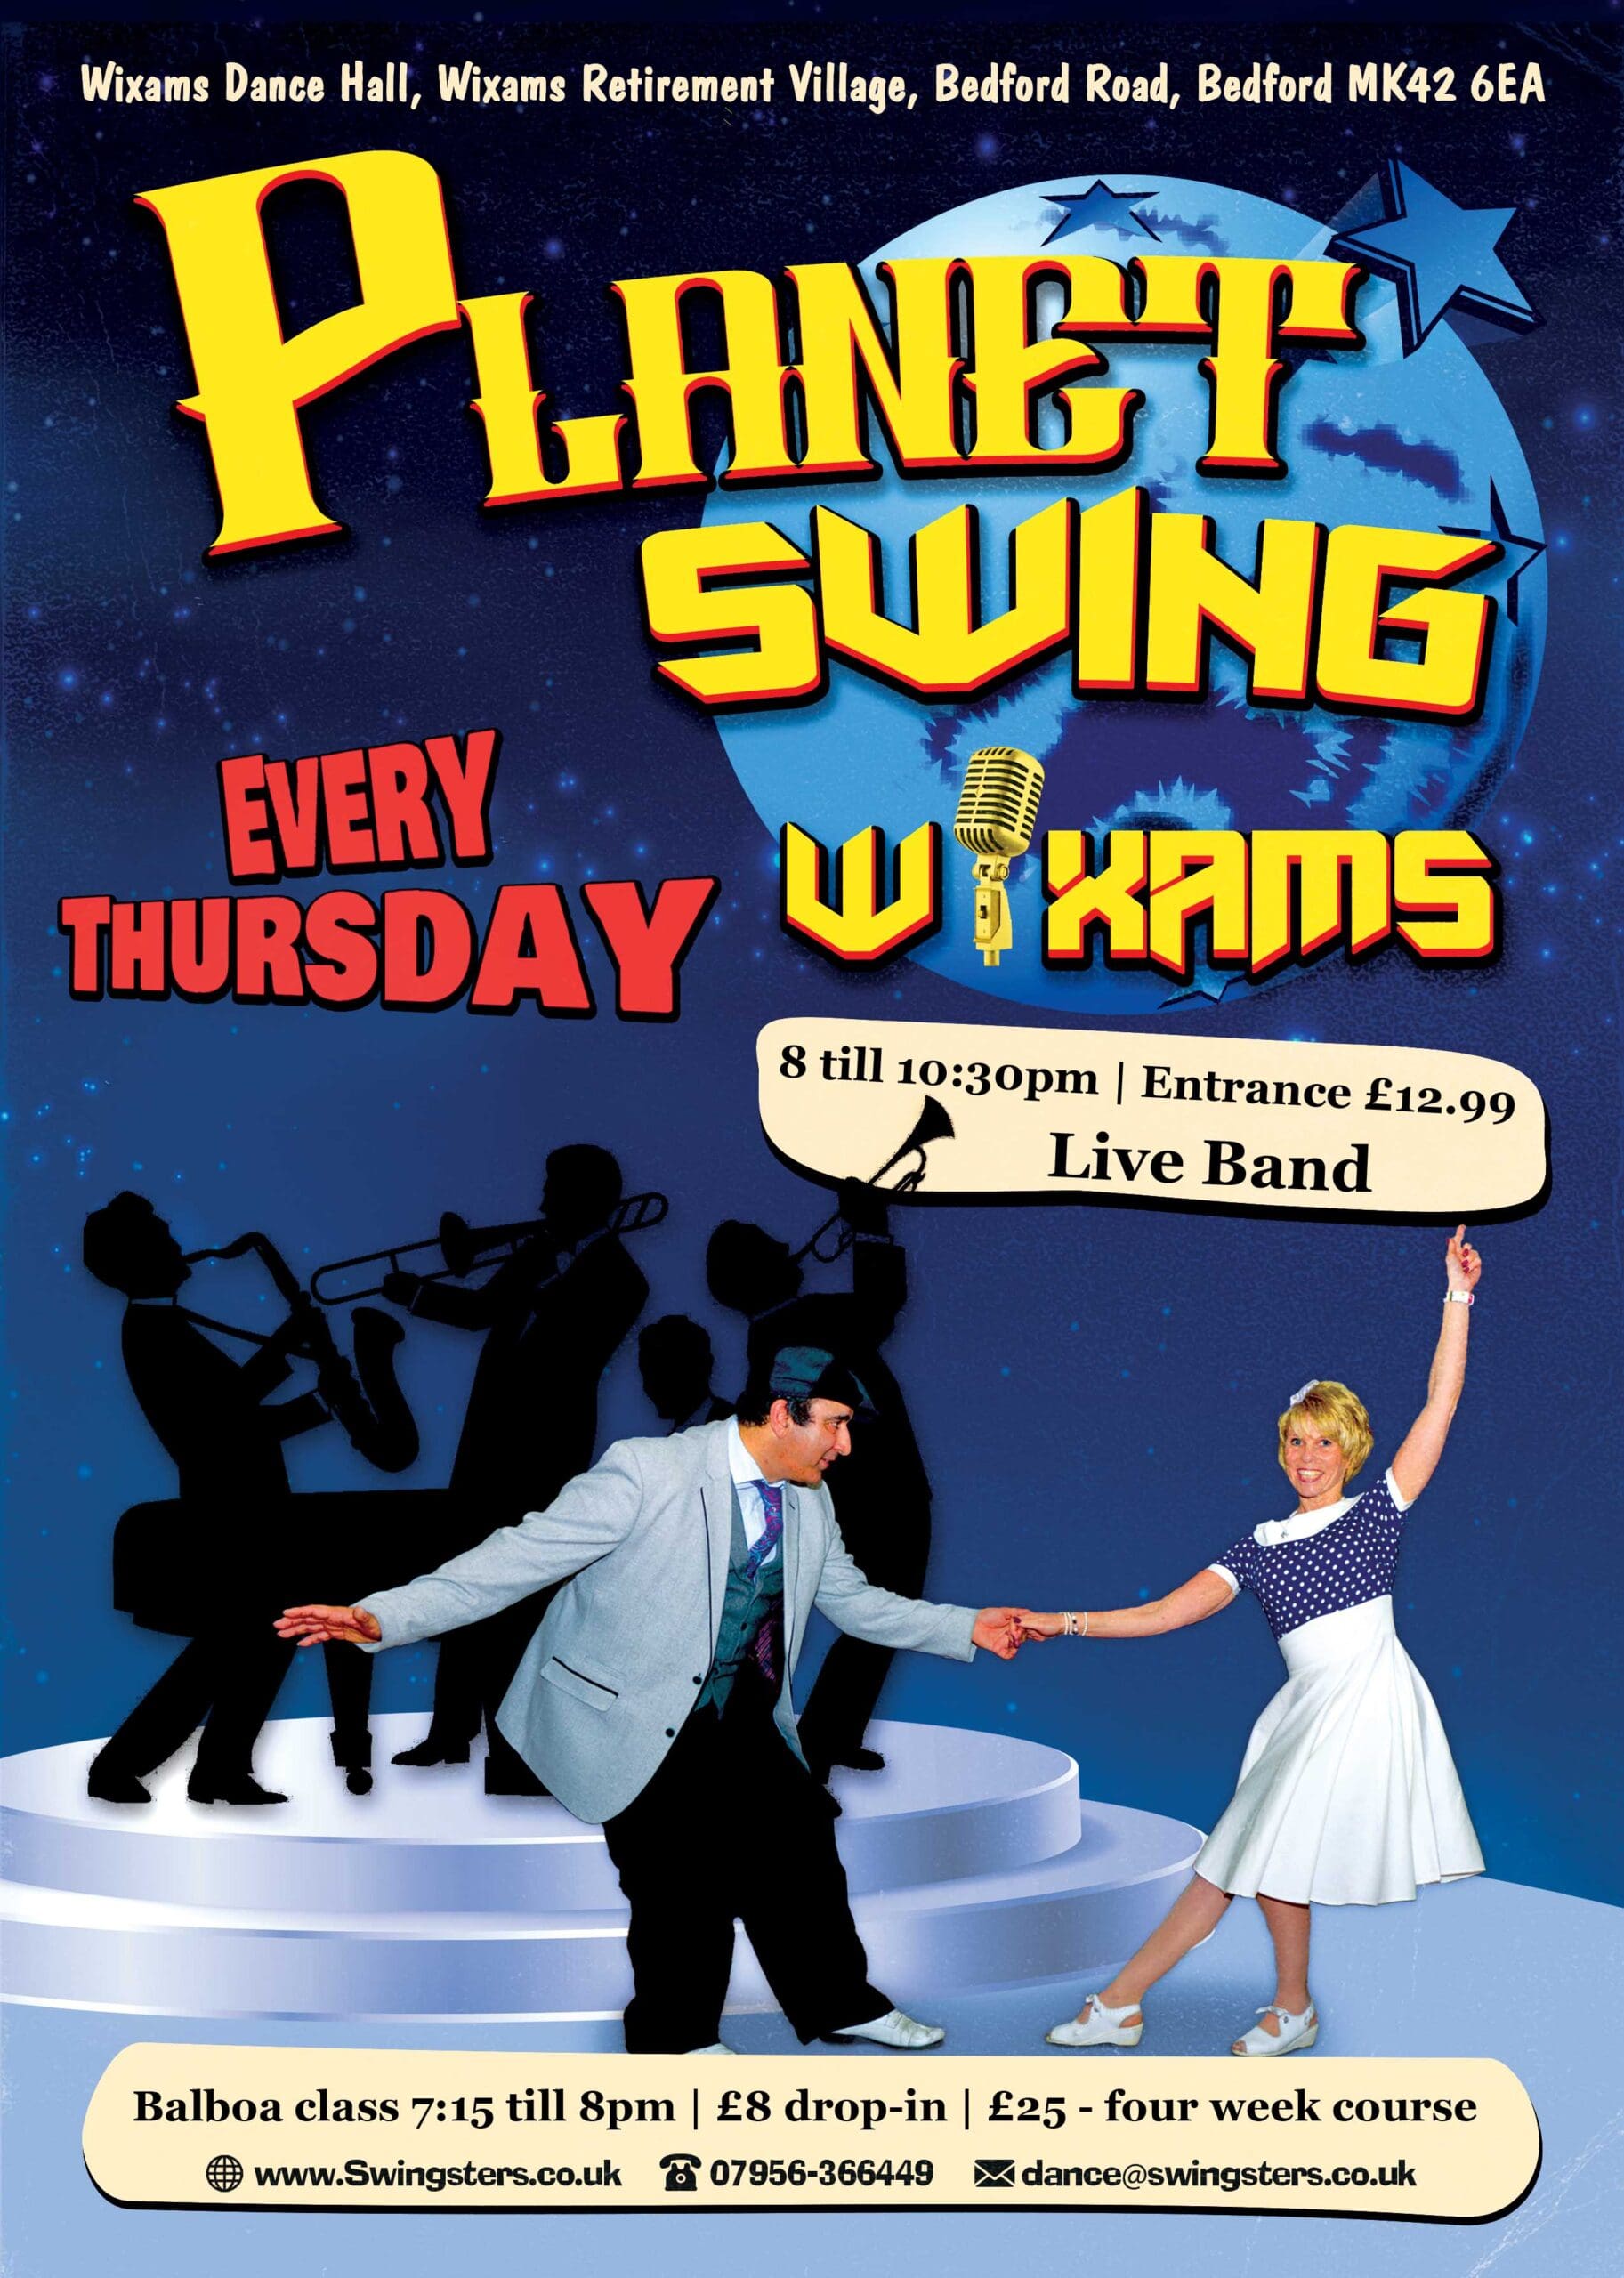 Planet Swing Wixams